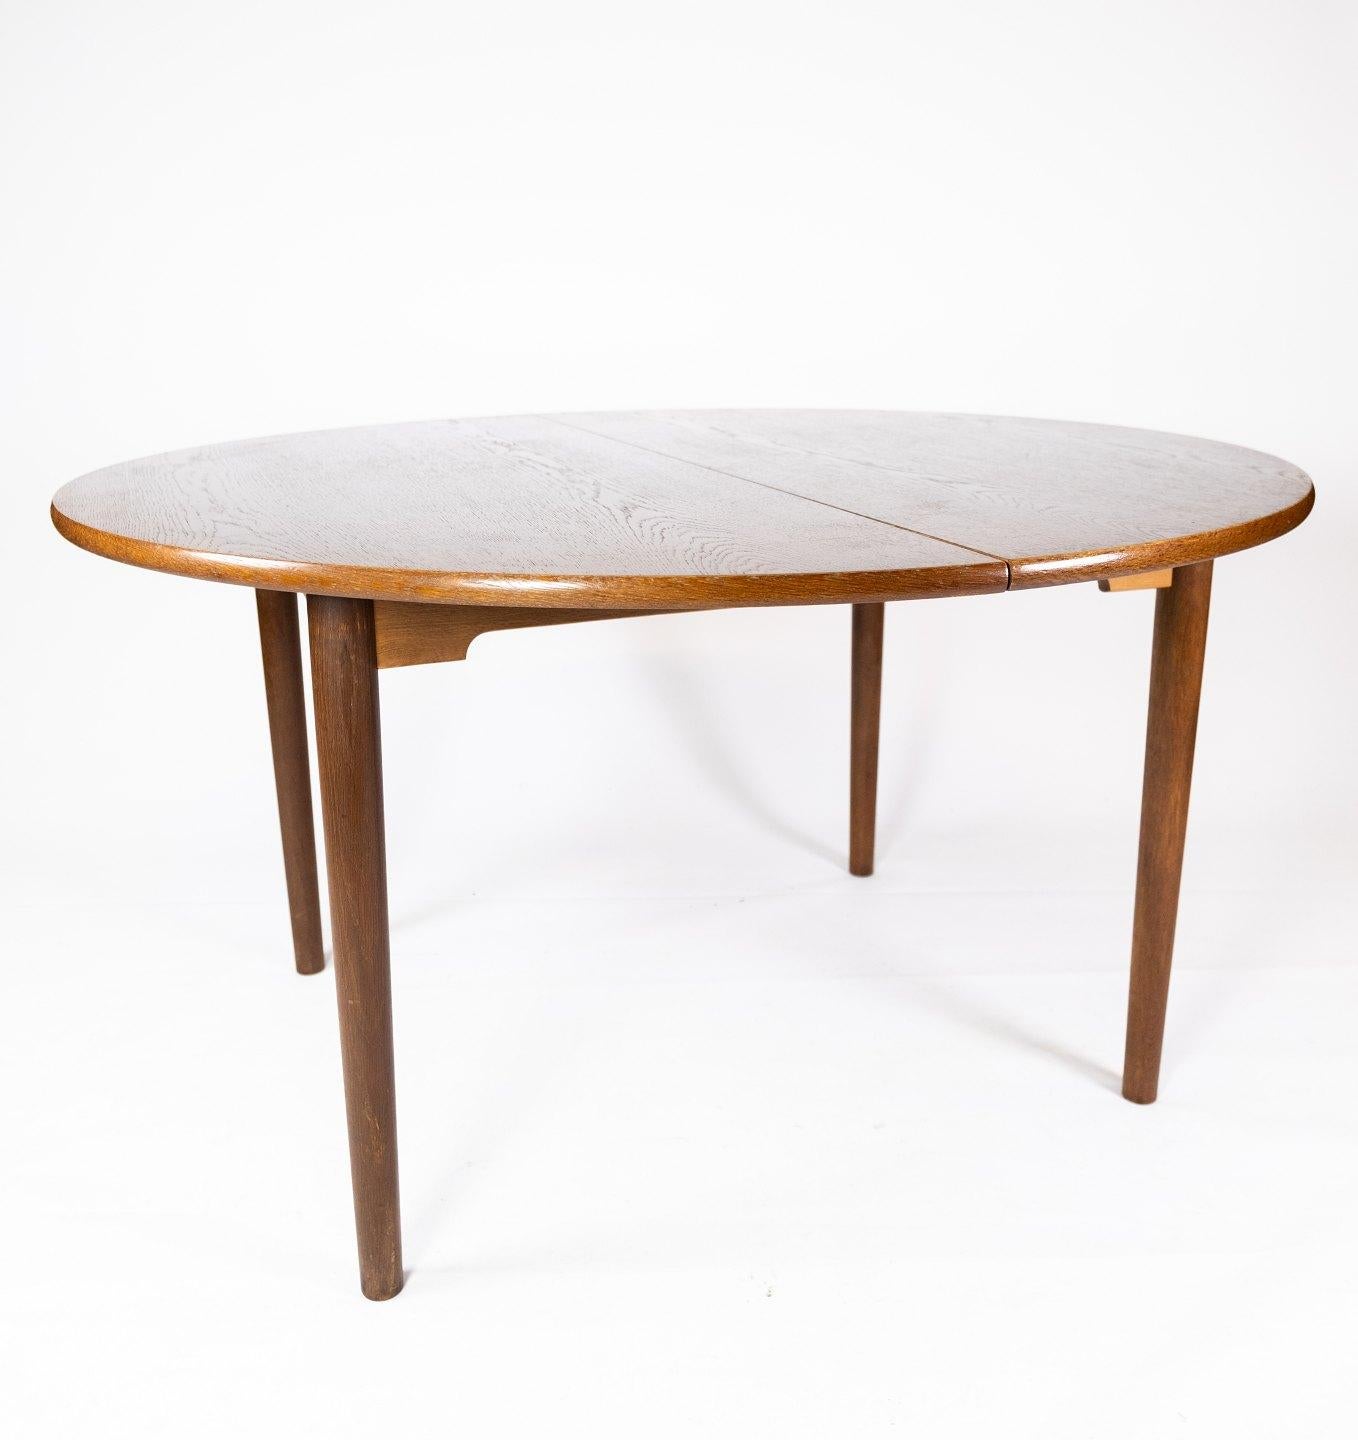 This Danish-designed dining table from the 1960s exudes a timeless appeal with its elegant silhouette and rich dark oak finish. Crafted with meticulous attention to detail, it showcases the quintessential Danish design principles of simplicity,